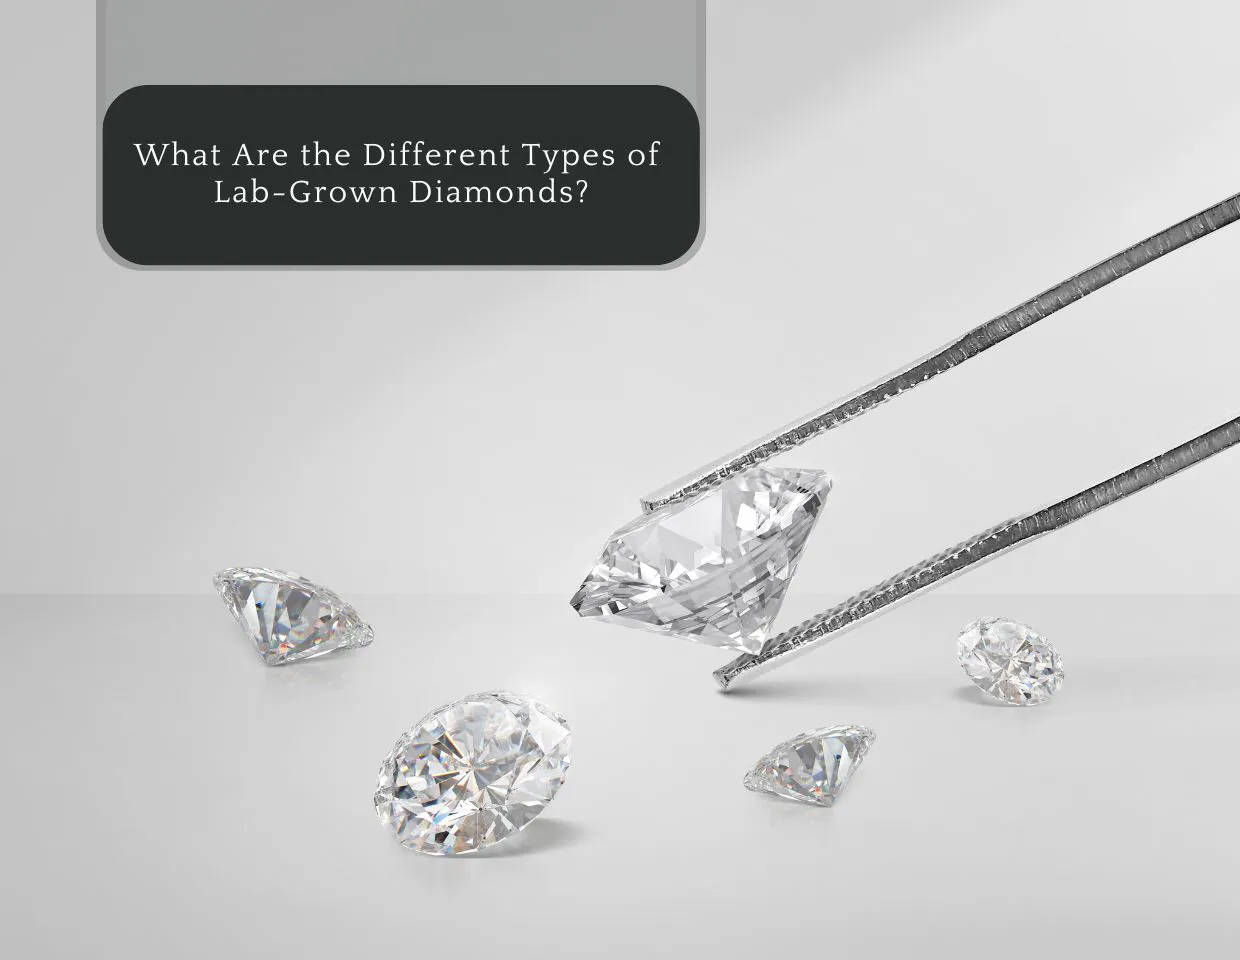 What Are the Different Types of Lab-Grown Diamonds